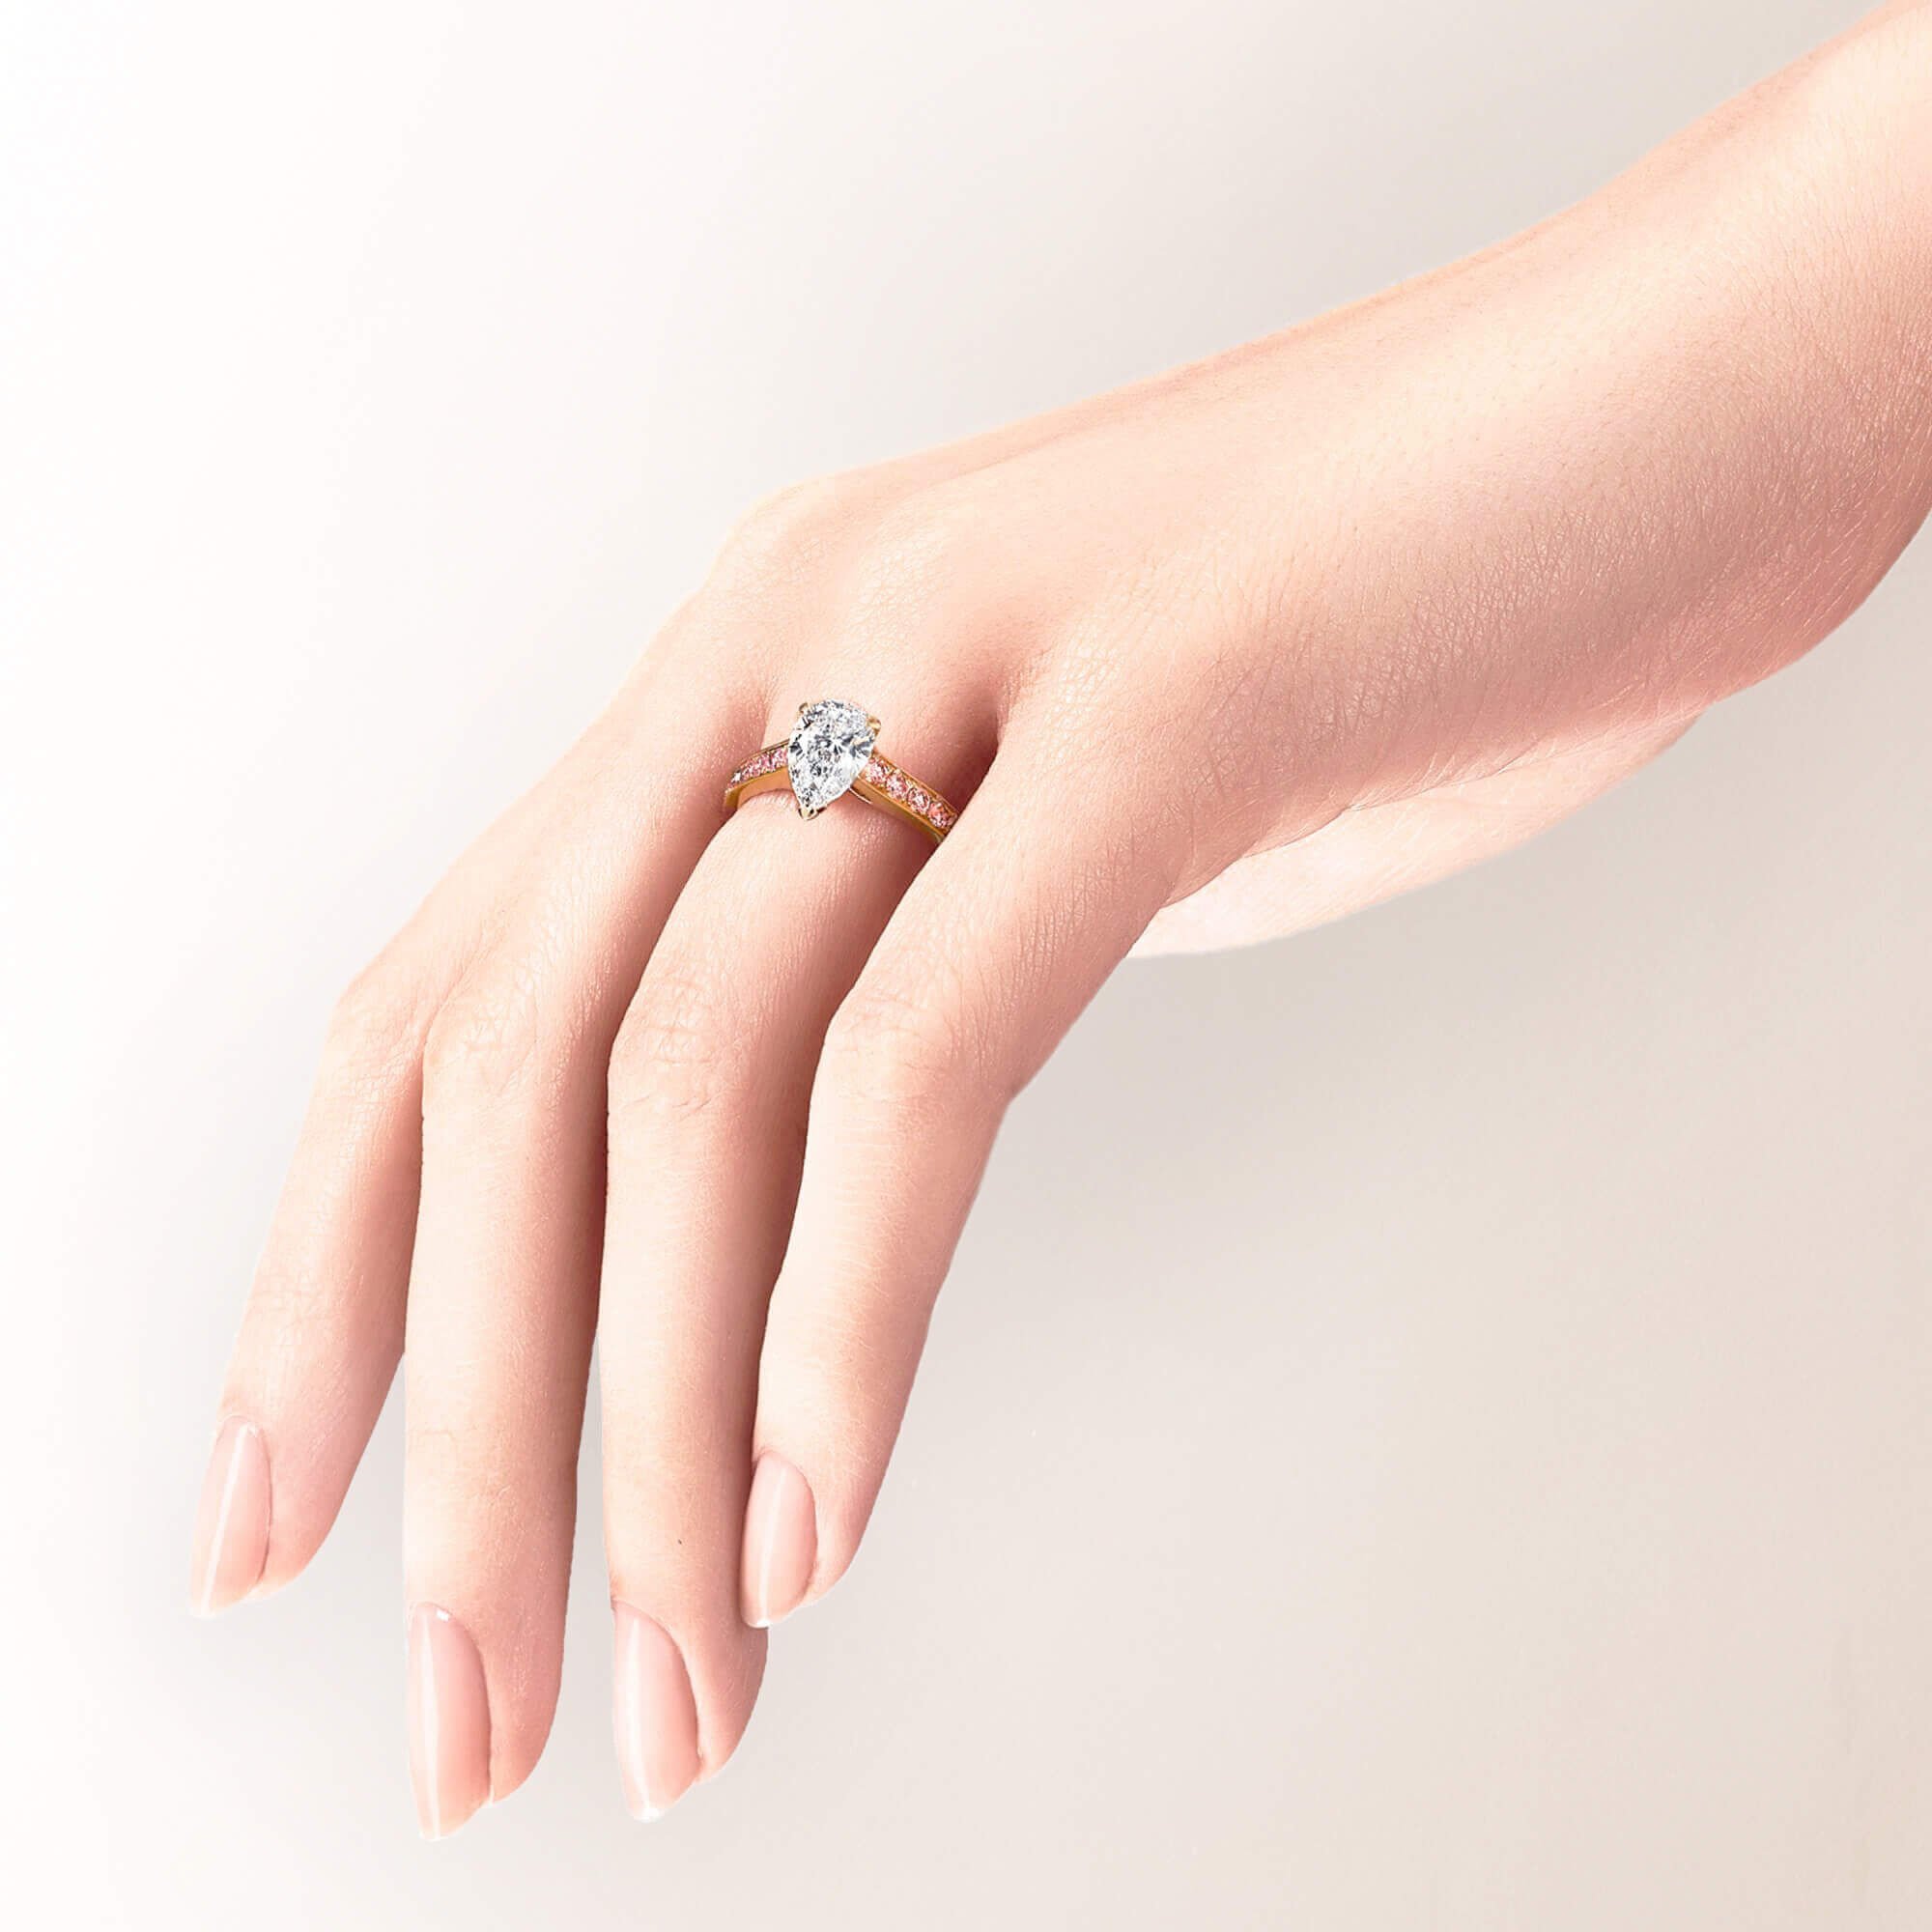 A models hand wearing a Graff pear shape diamond engagement ring